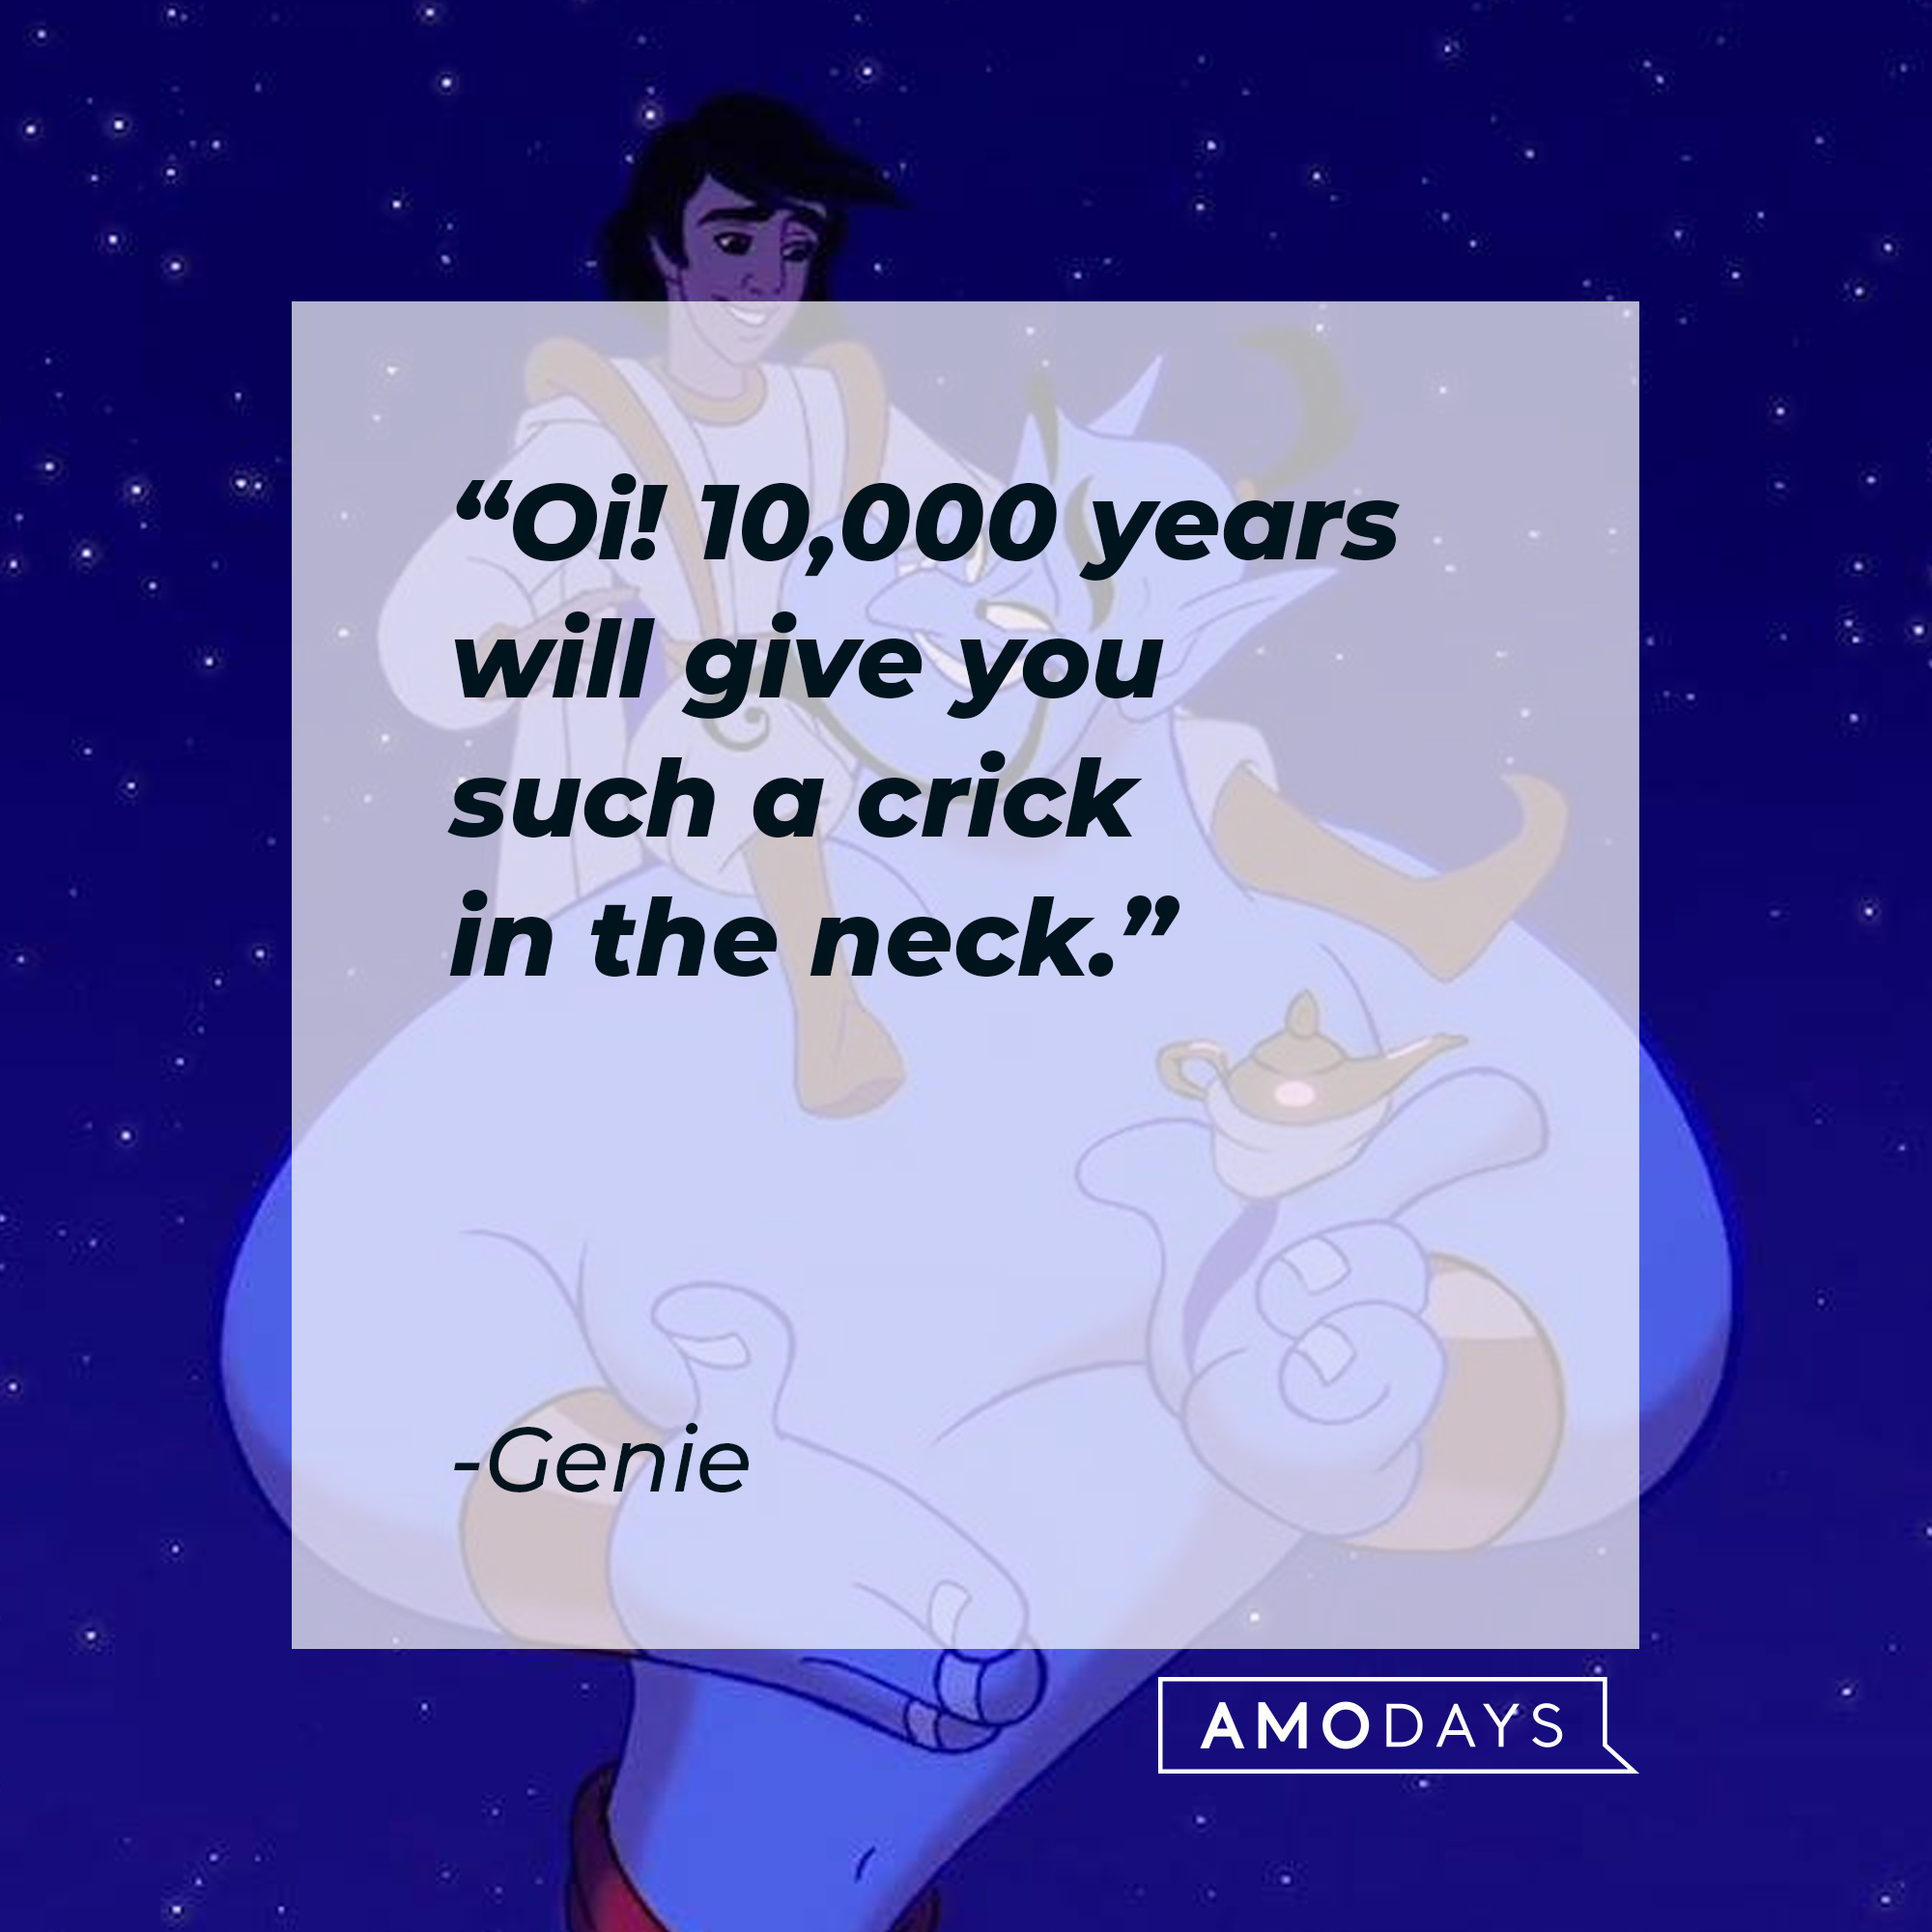 The animated Genie with his quote: "Oi! 10,000 years will give you such a crick in the neck." | Source: Facebook.com/DisneyAladdin